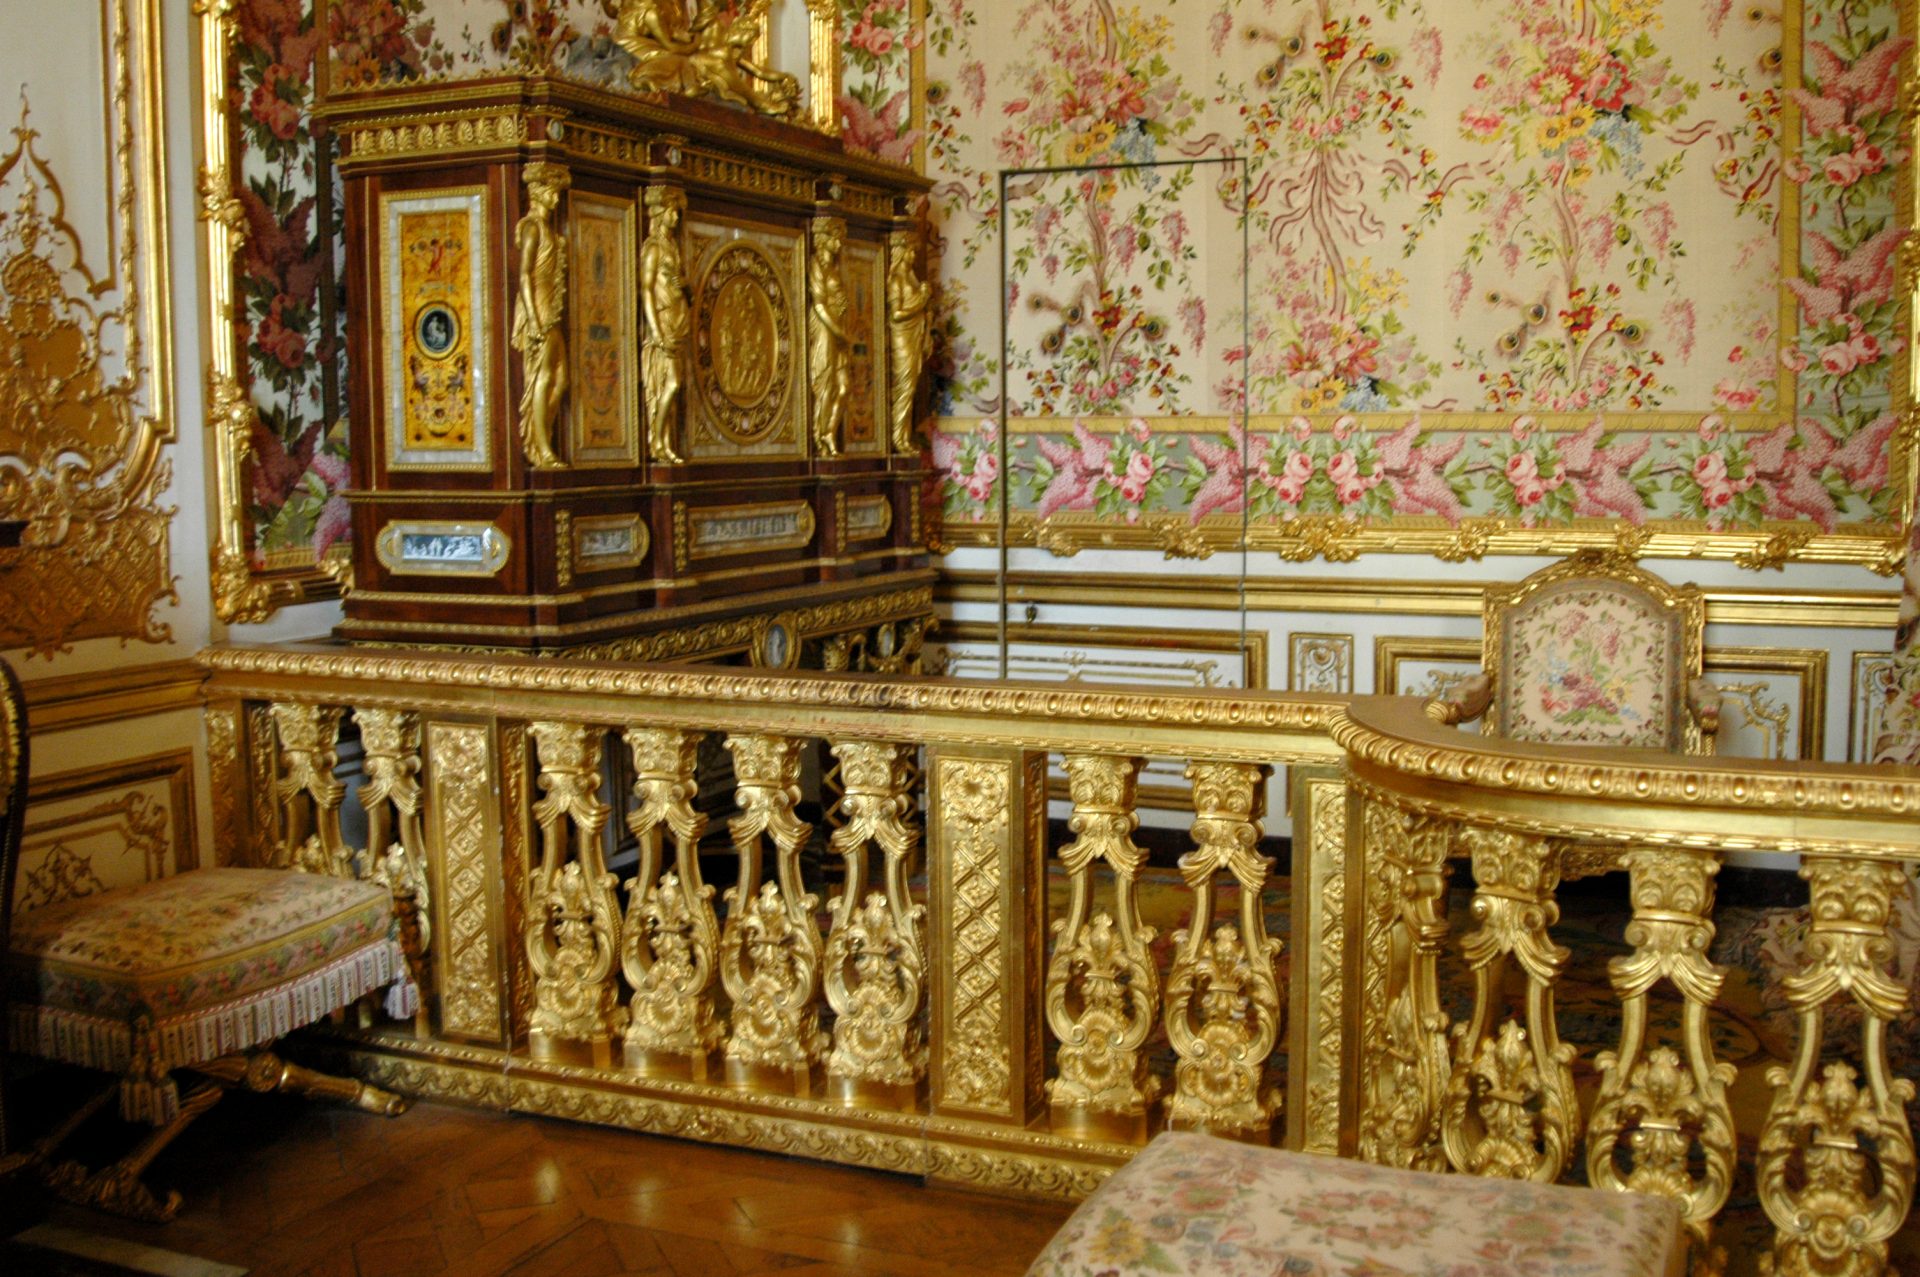 A photograph of a room at Versailles Palace, covered in ornamental gold with a visible secret door in one of the walls.